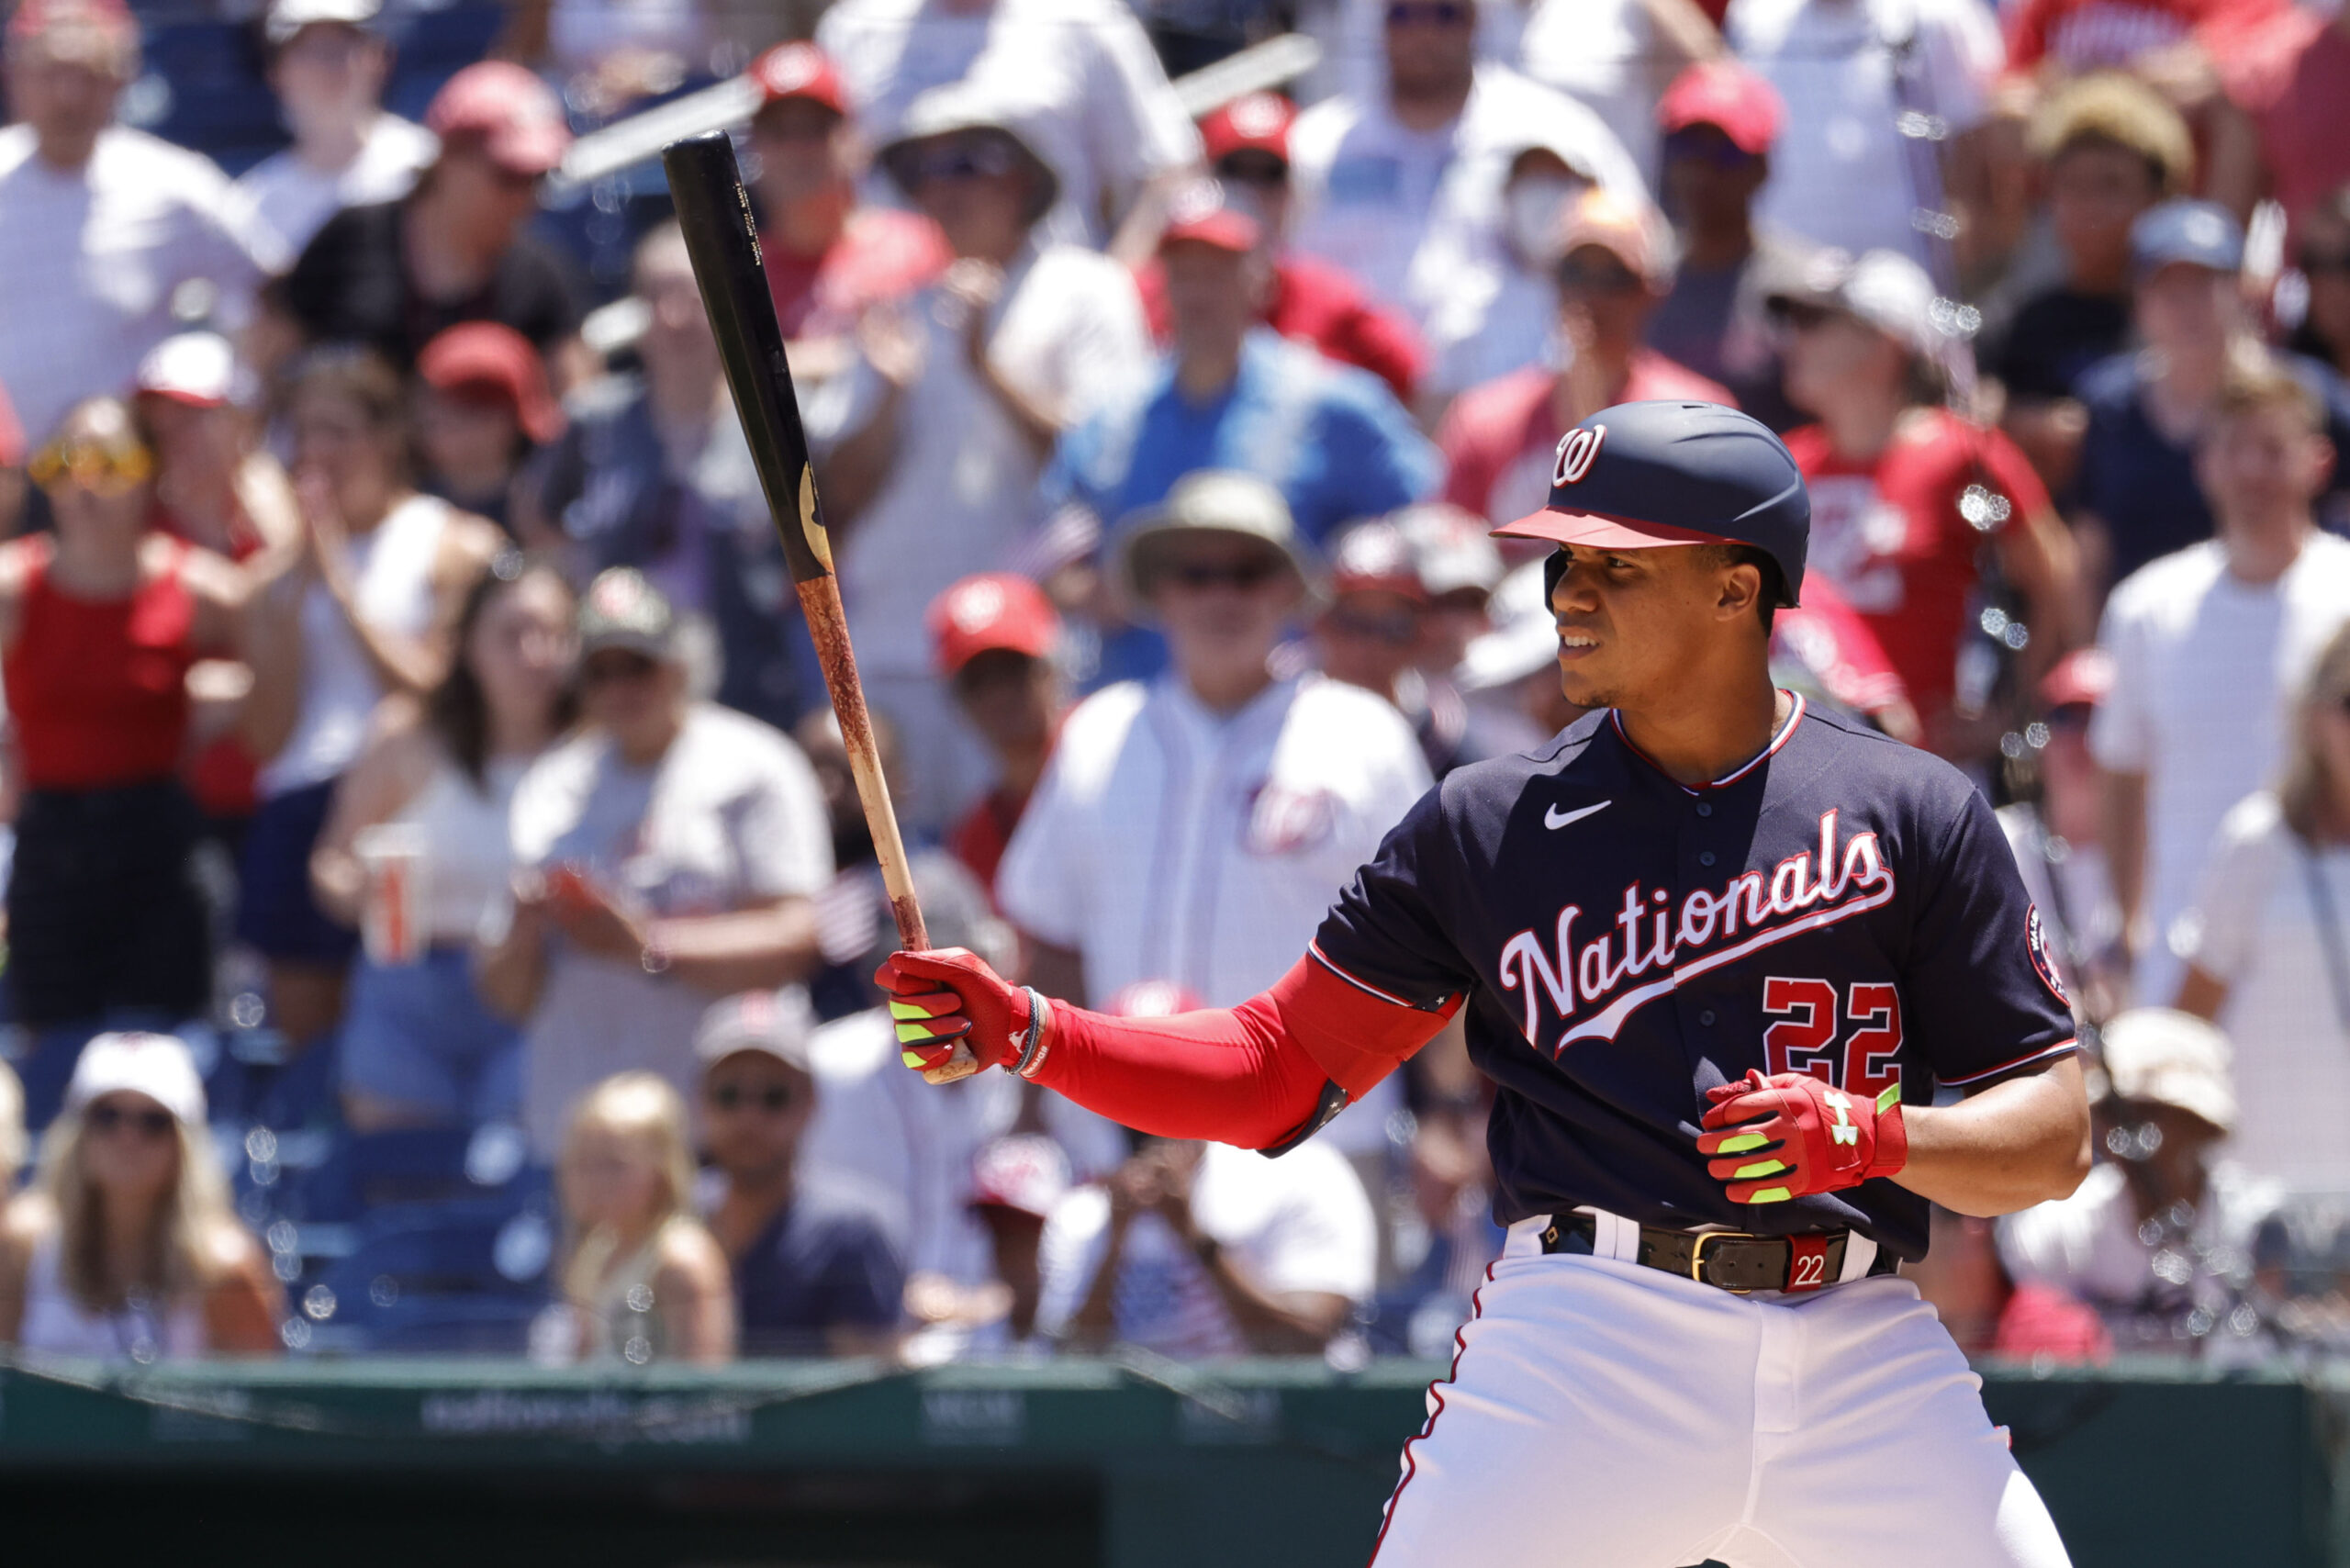 Countries need to make the most of their time with Juan Soto